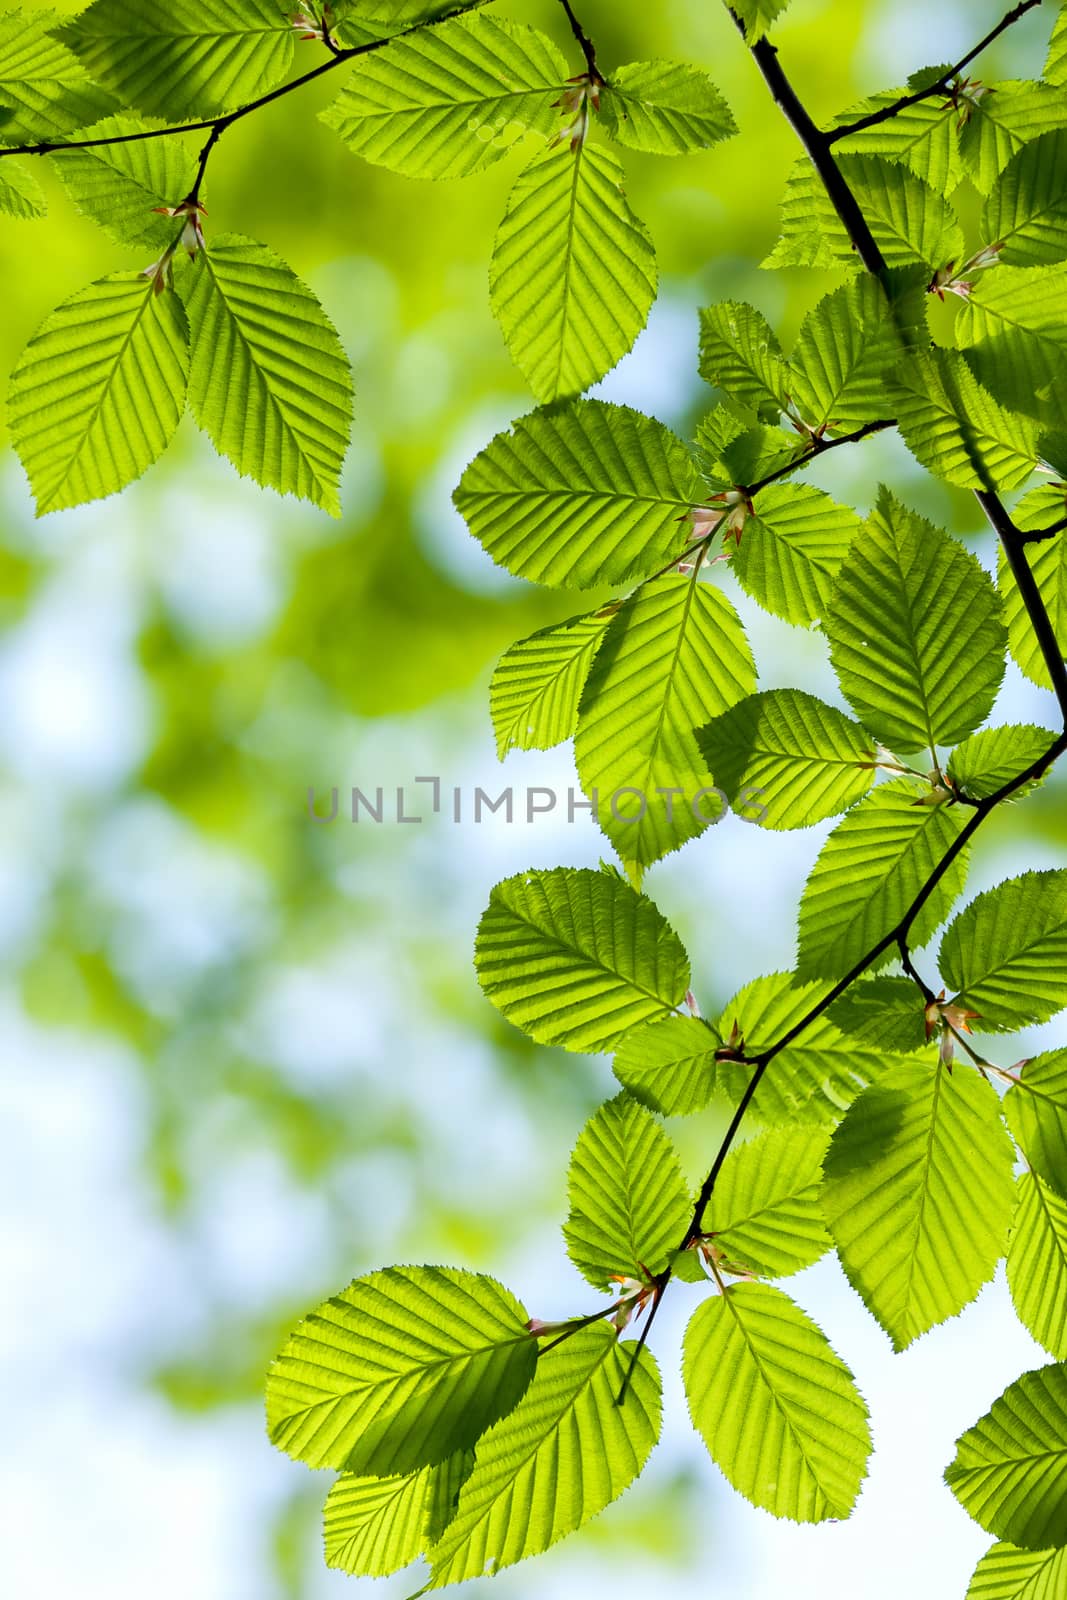 Beautiful, harmonious forest detail, with hornbeam leaves by Digoarpi